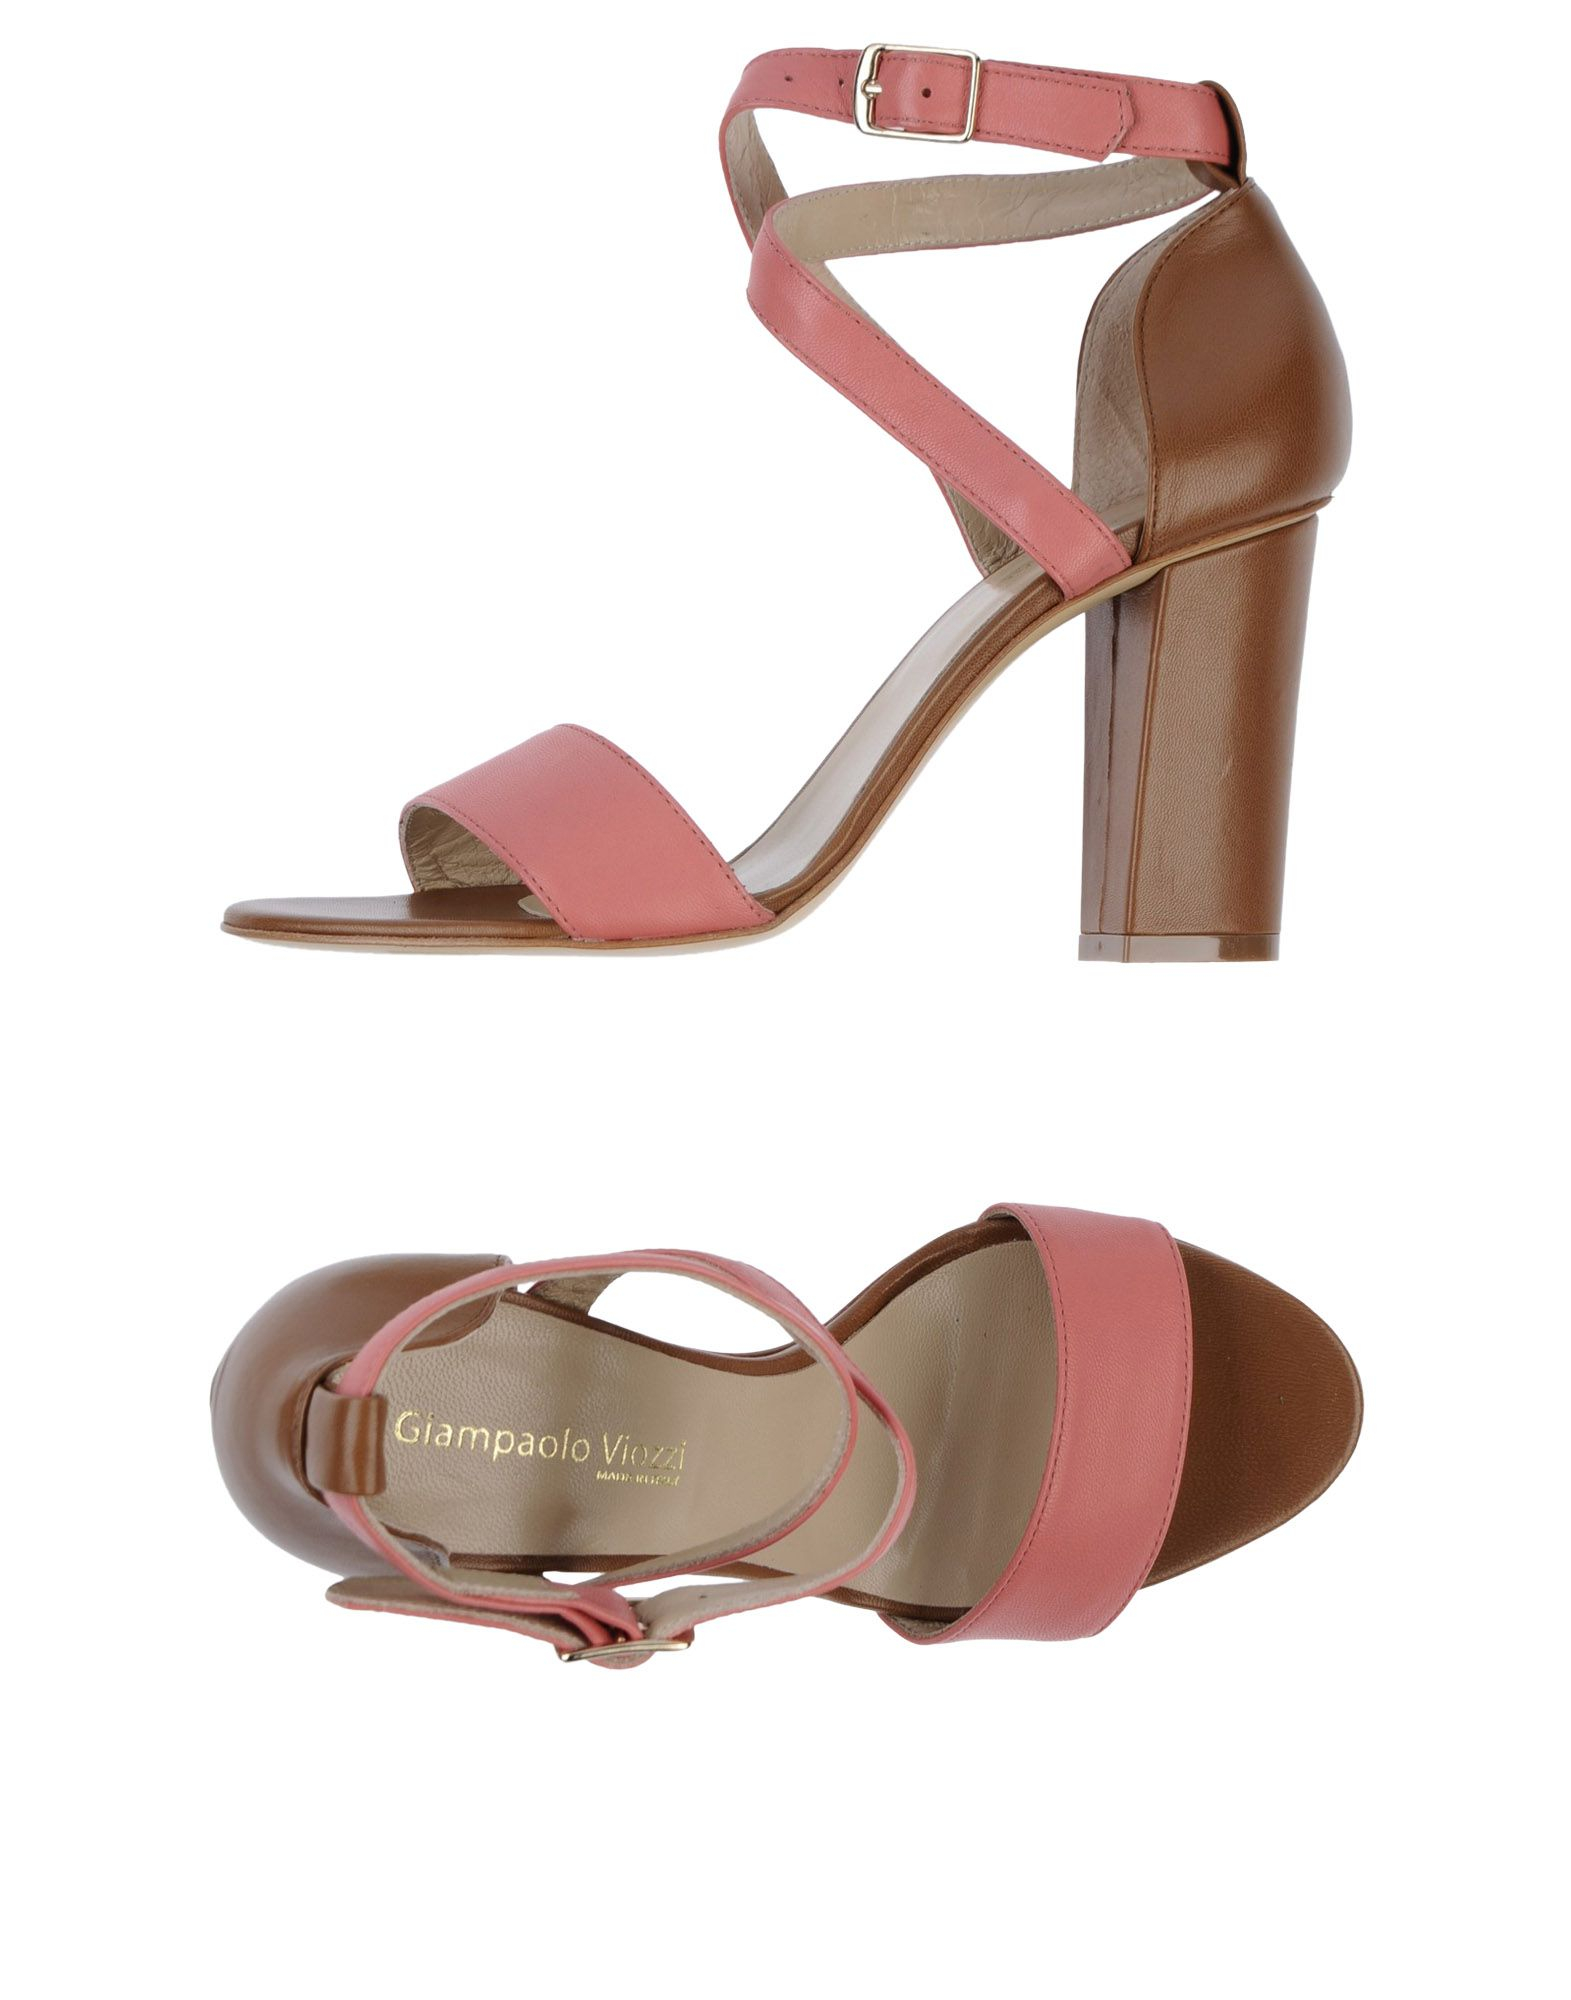 Giampaolo viozzi High-heeled Sandals in Pink (Pastel pink) - Save 69% ...